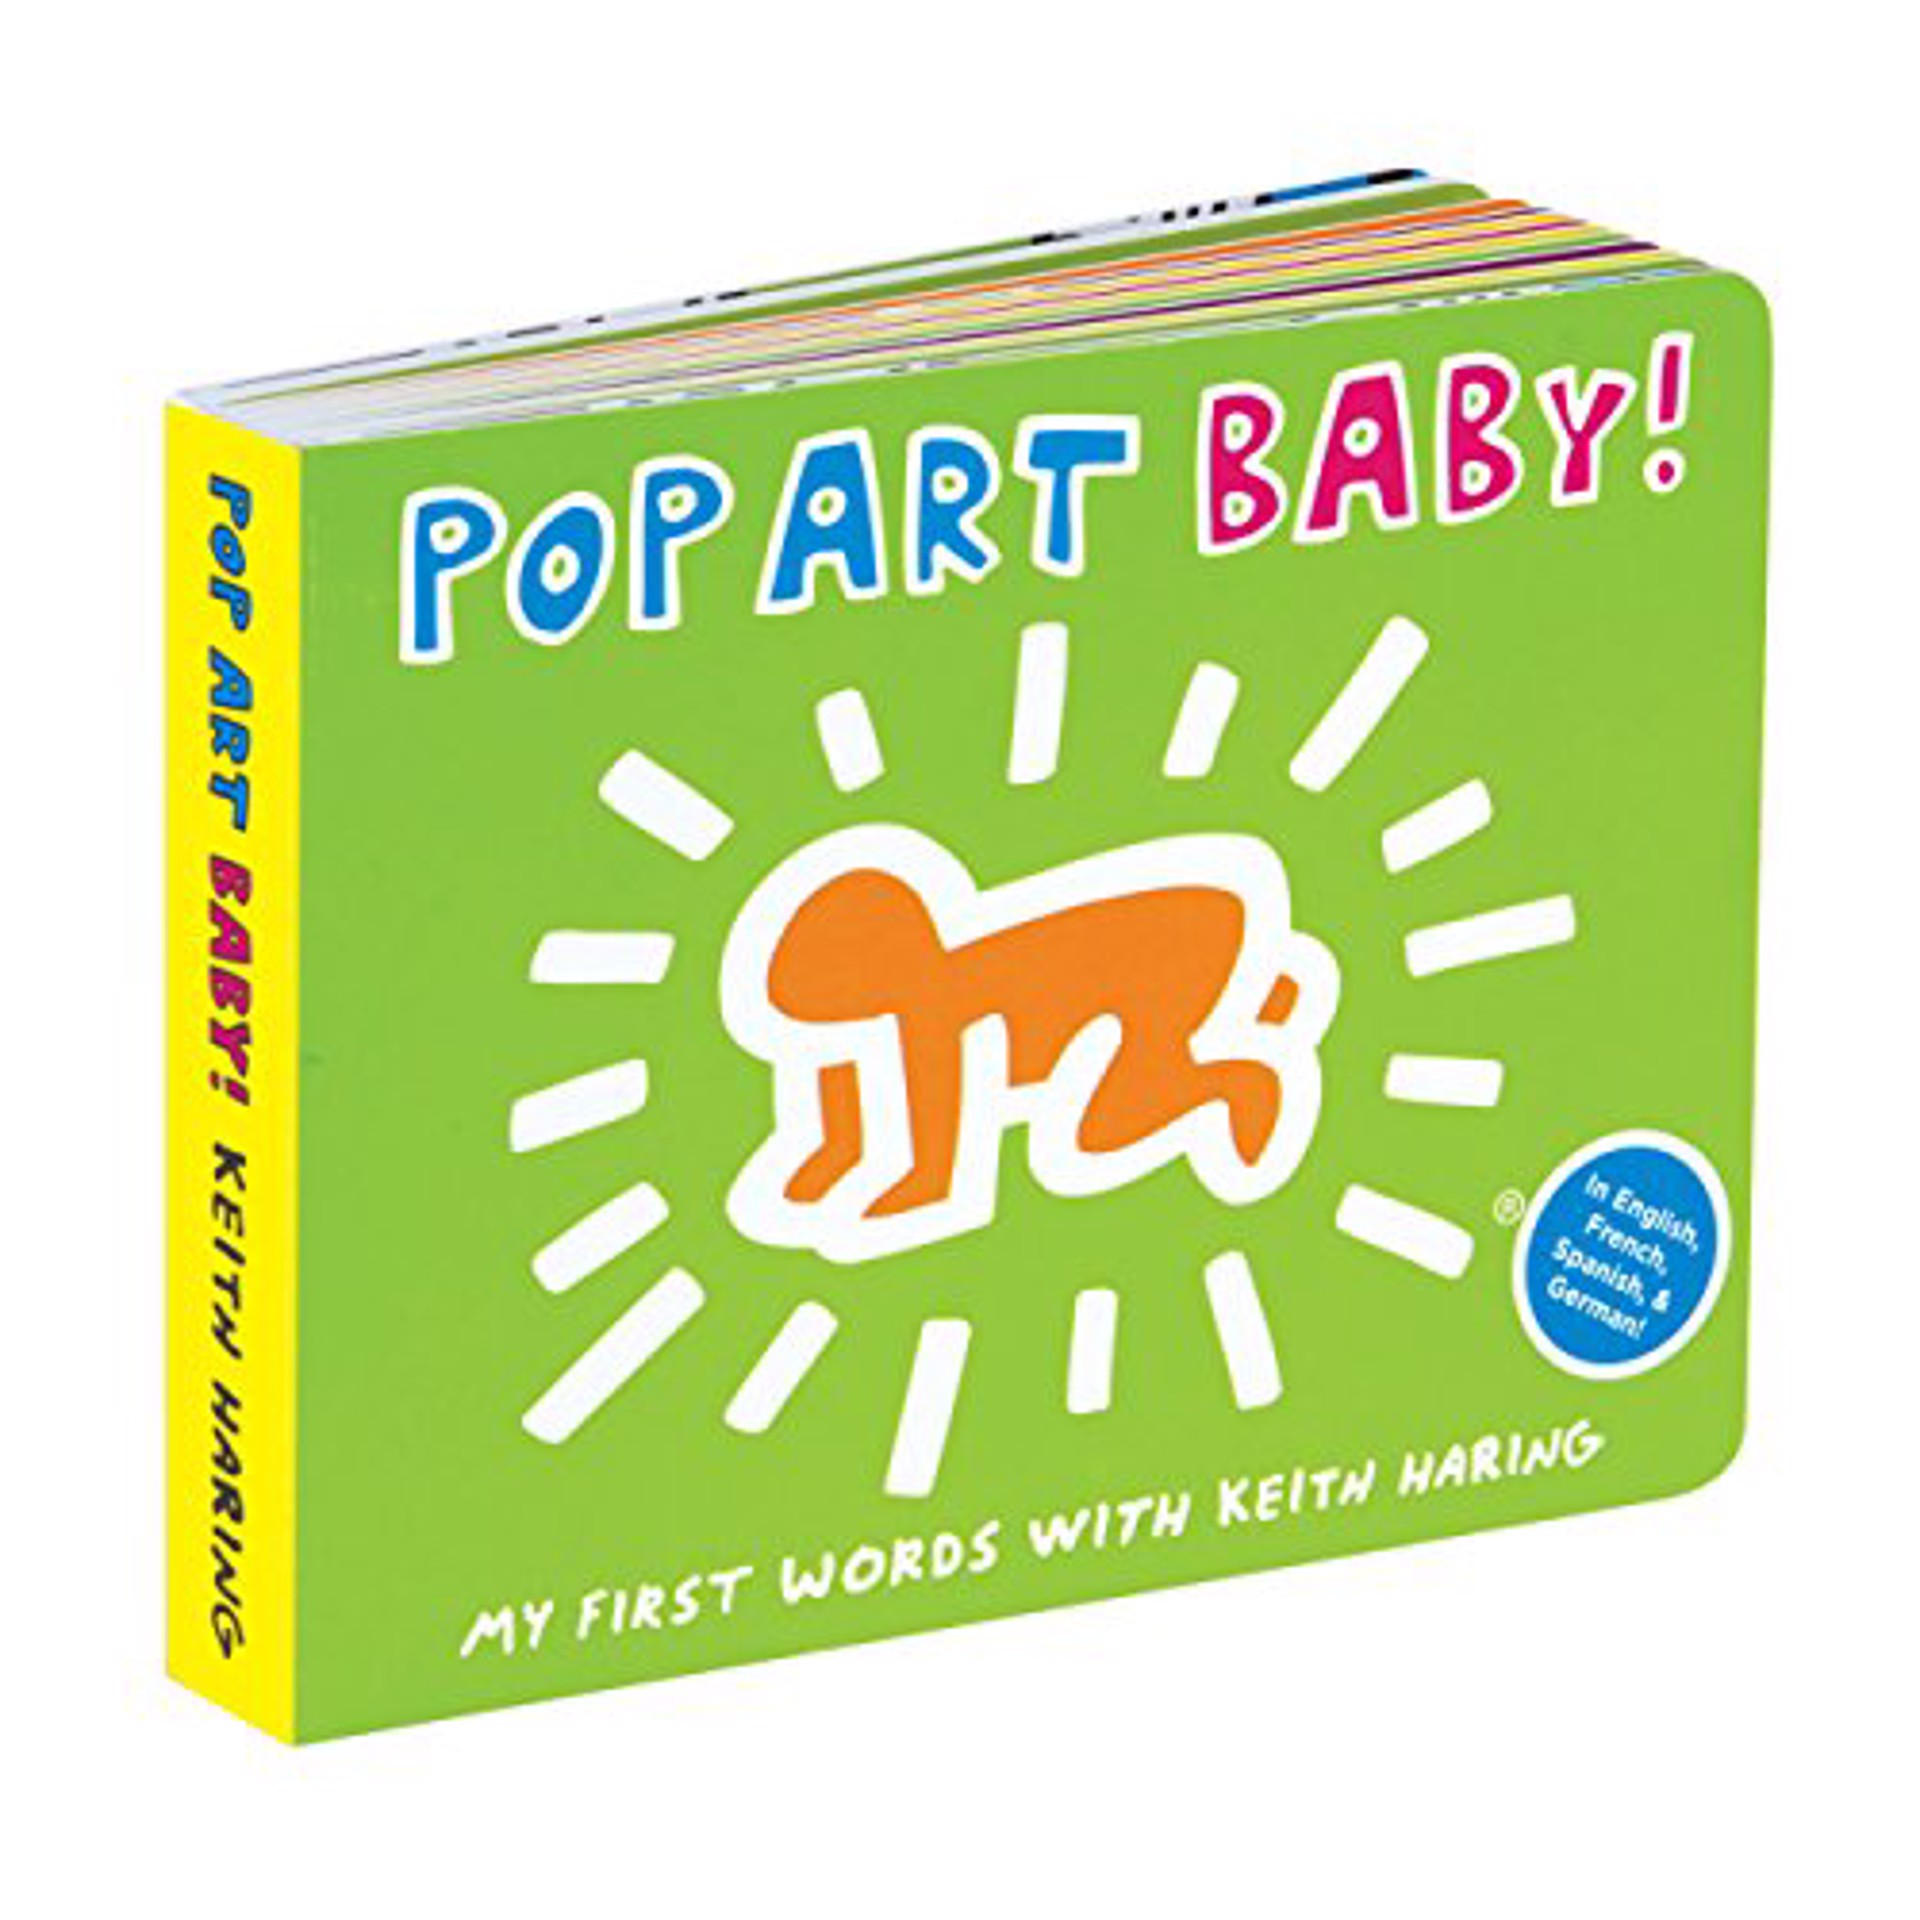 Pop Art Baby! by Keith Haring